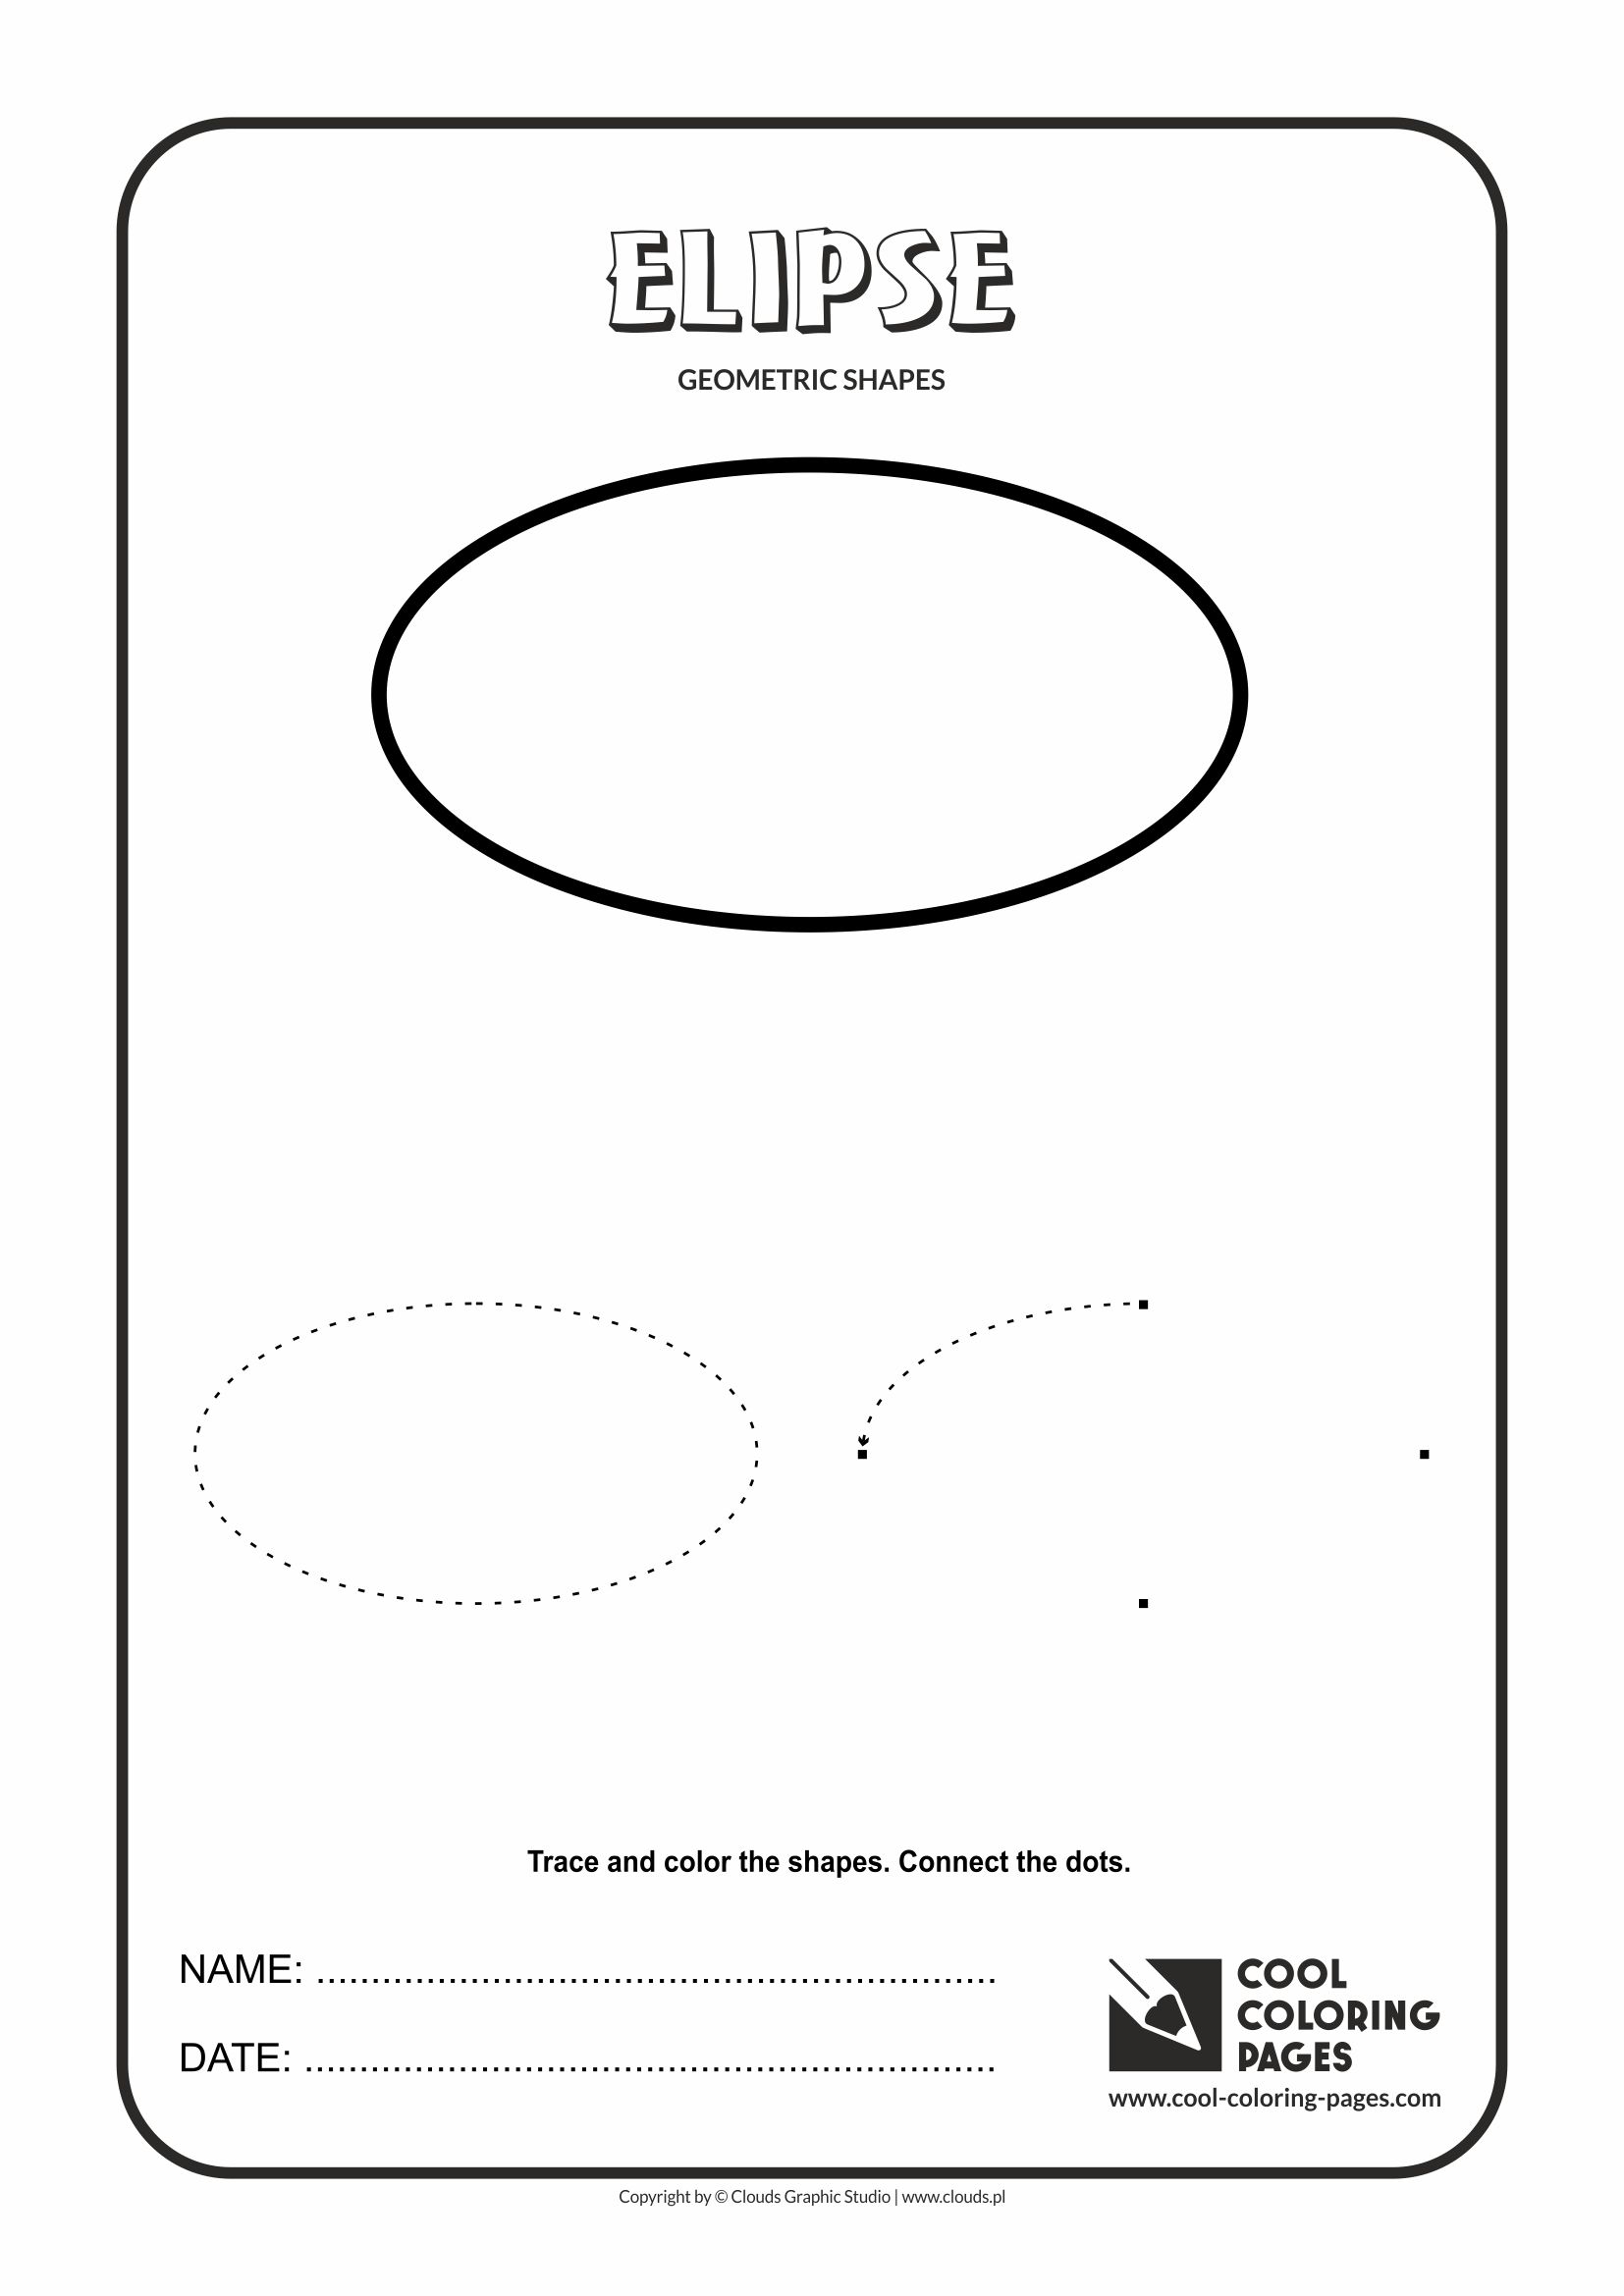 Cool Coloring Pages - Geometric shapes / Elipse